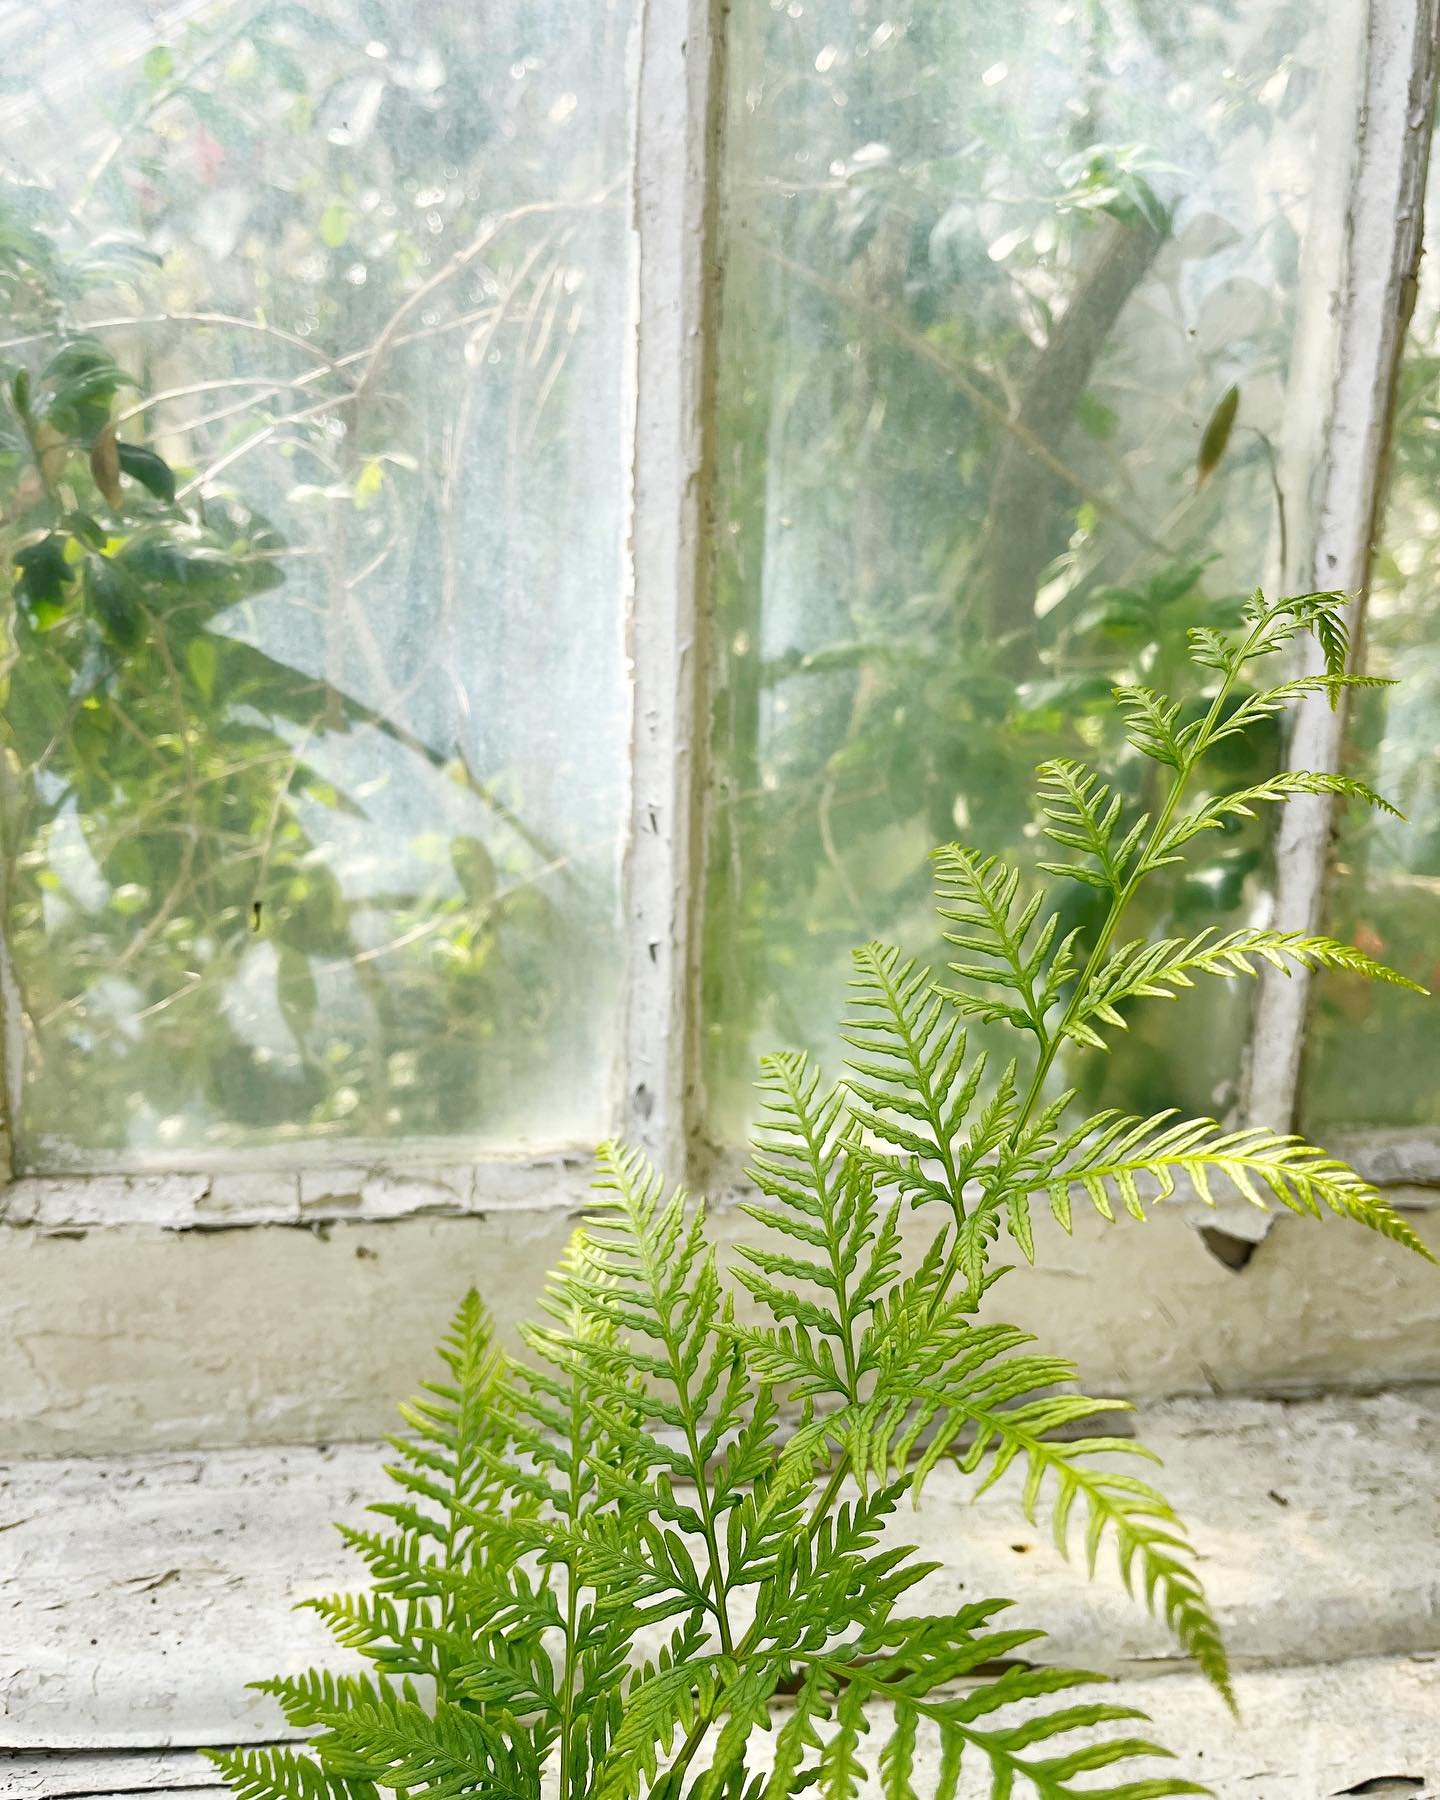 Inside the magical Victorian Glasshouse at Tregrehan Gardens. I love when a garden has a &lsquo;secret garden&rsquo; feel and this glasshouse definitely had that ✨🌿